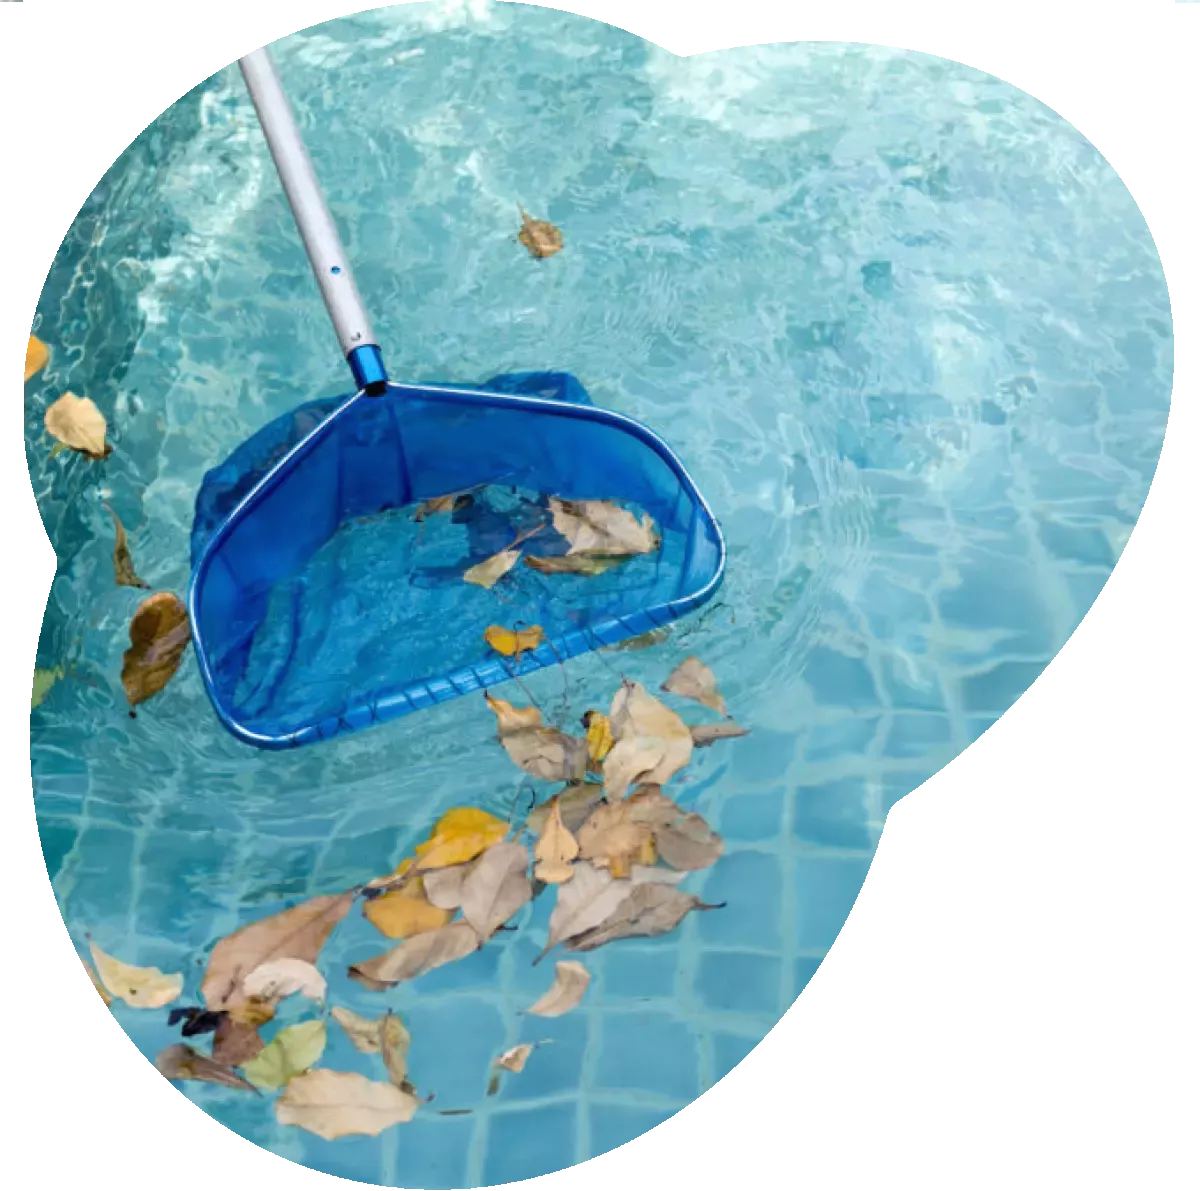 A pool net scooping leaves out of a vinyl pool.